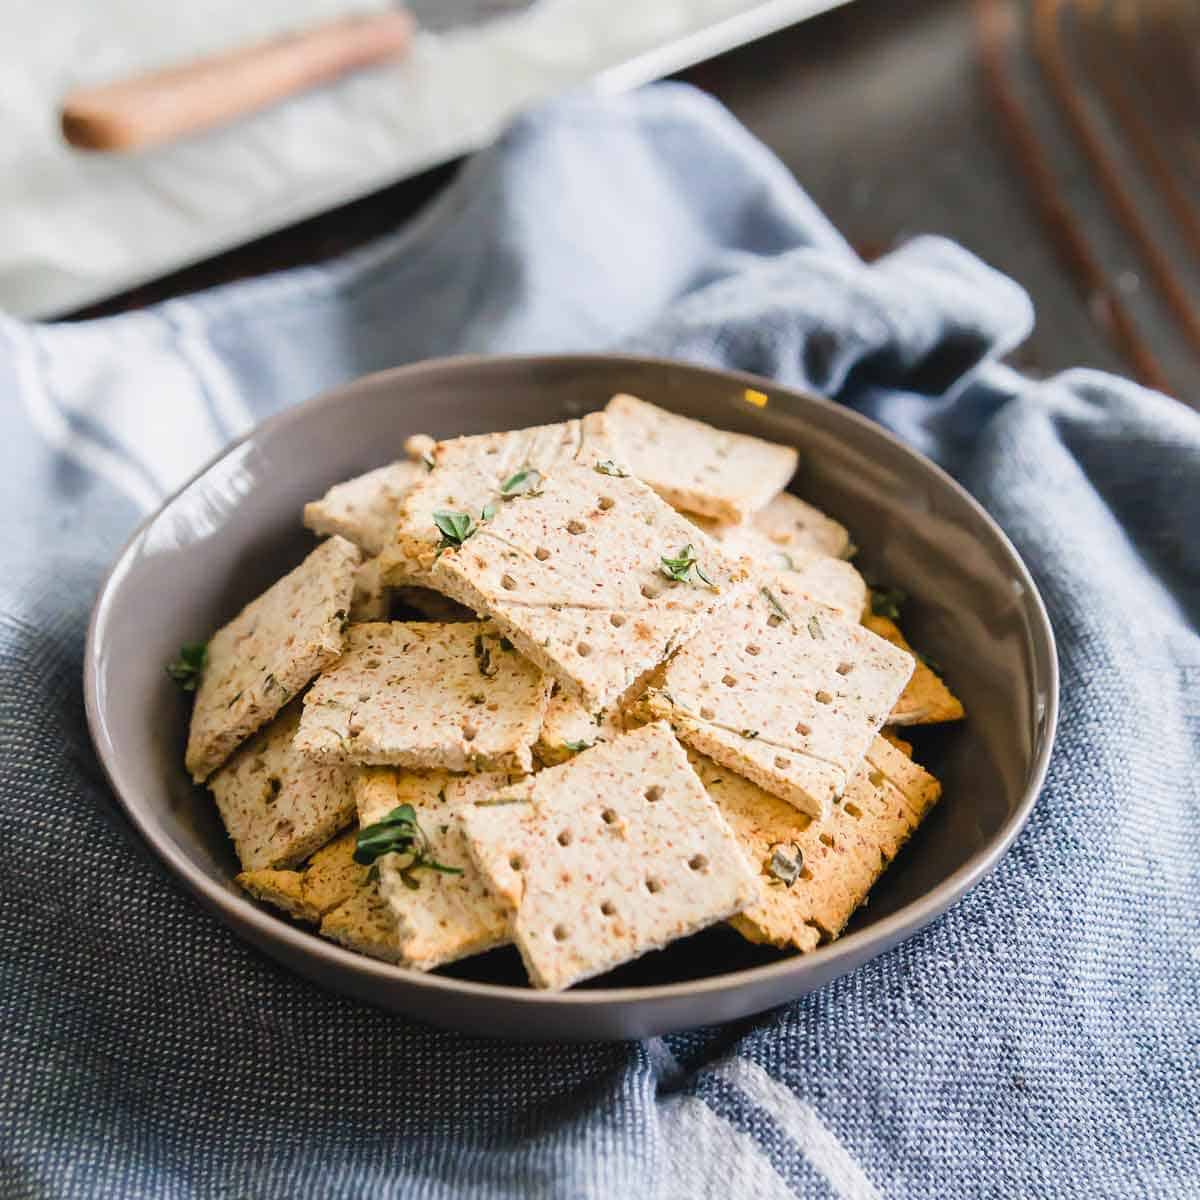 Use up leftover almond pulp from making almond milk and repurpose it into these easy vegan almond pulp crackers flavored with simple herbs and spices.